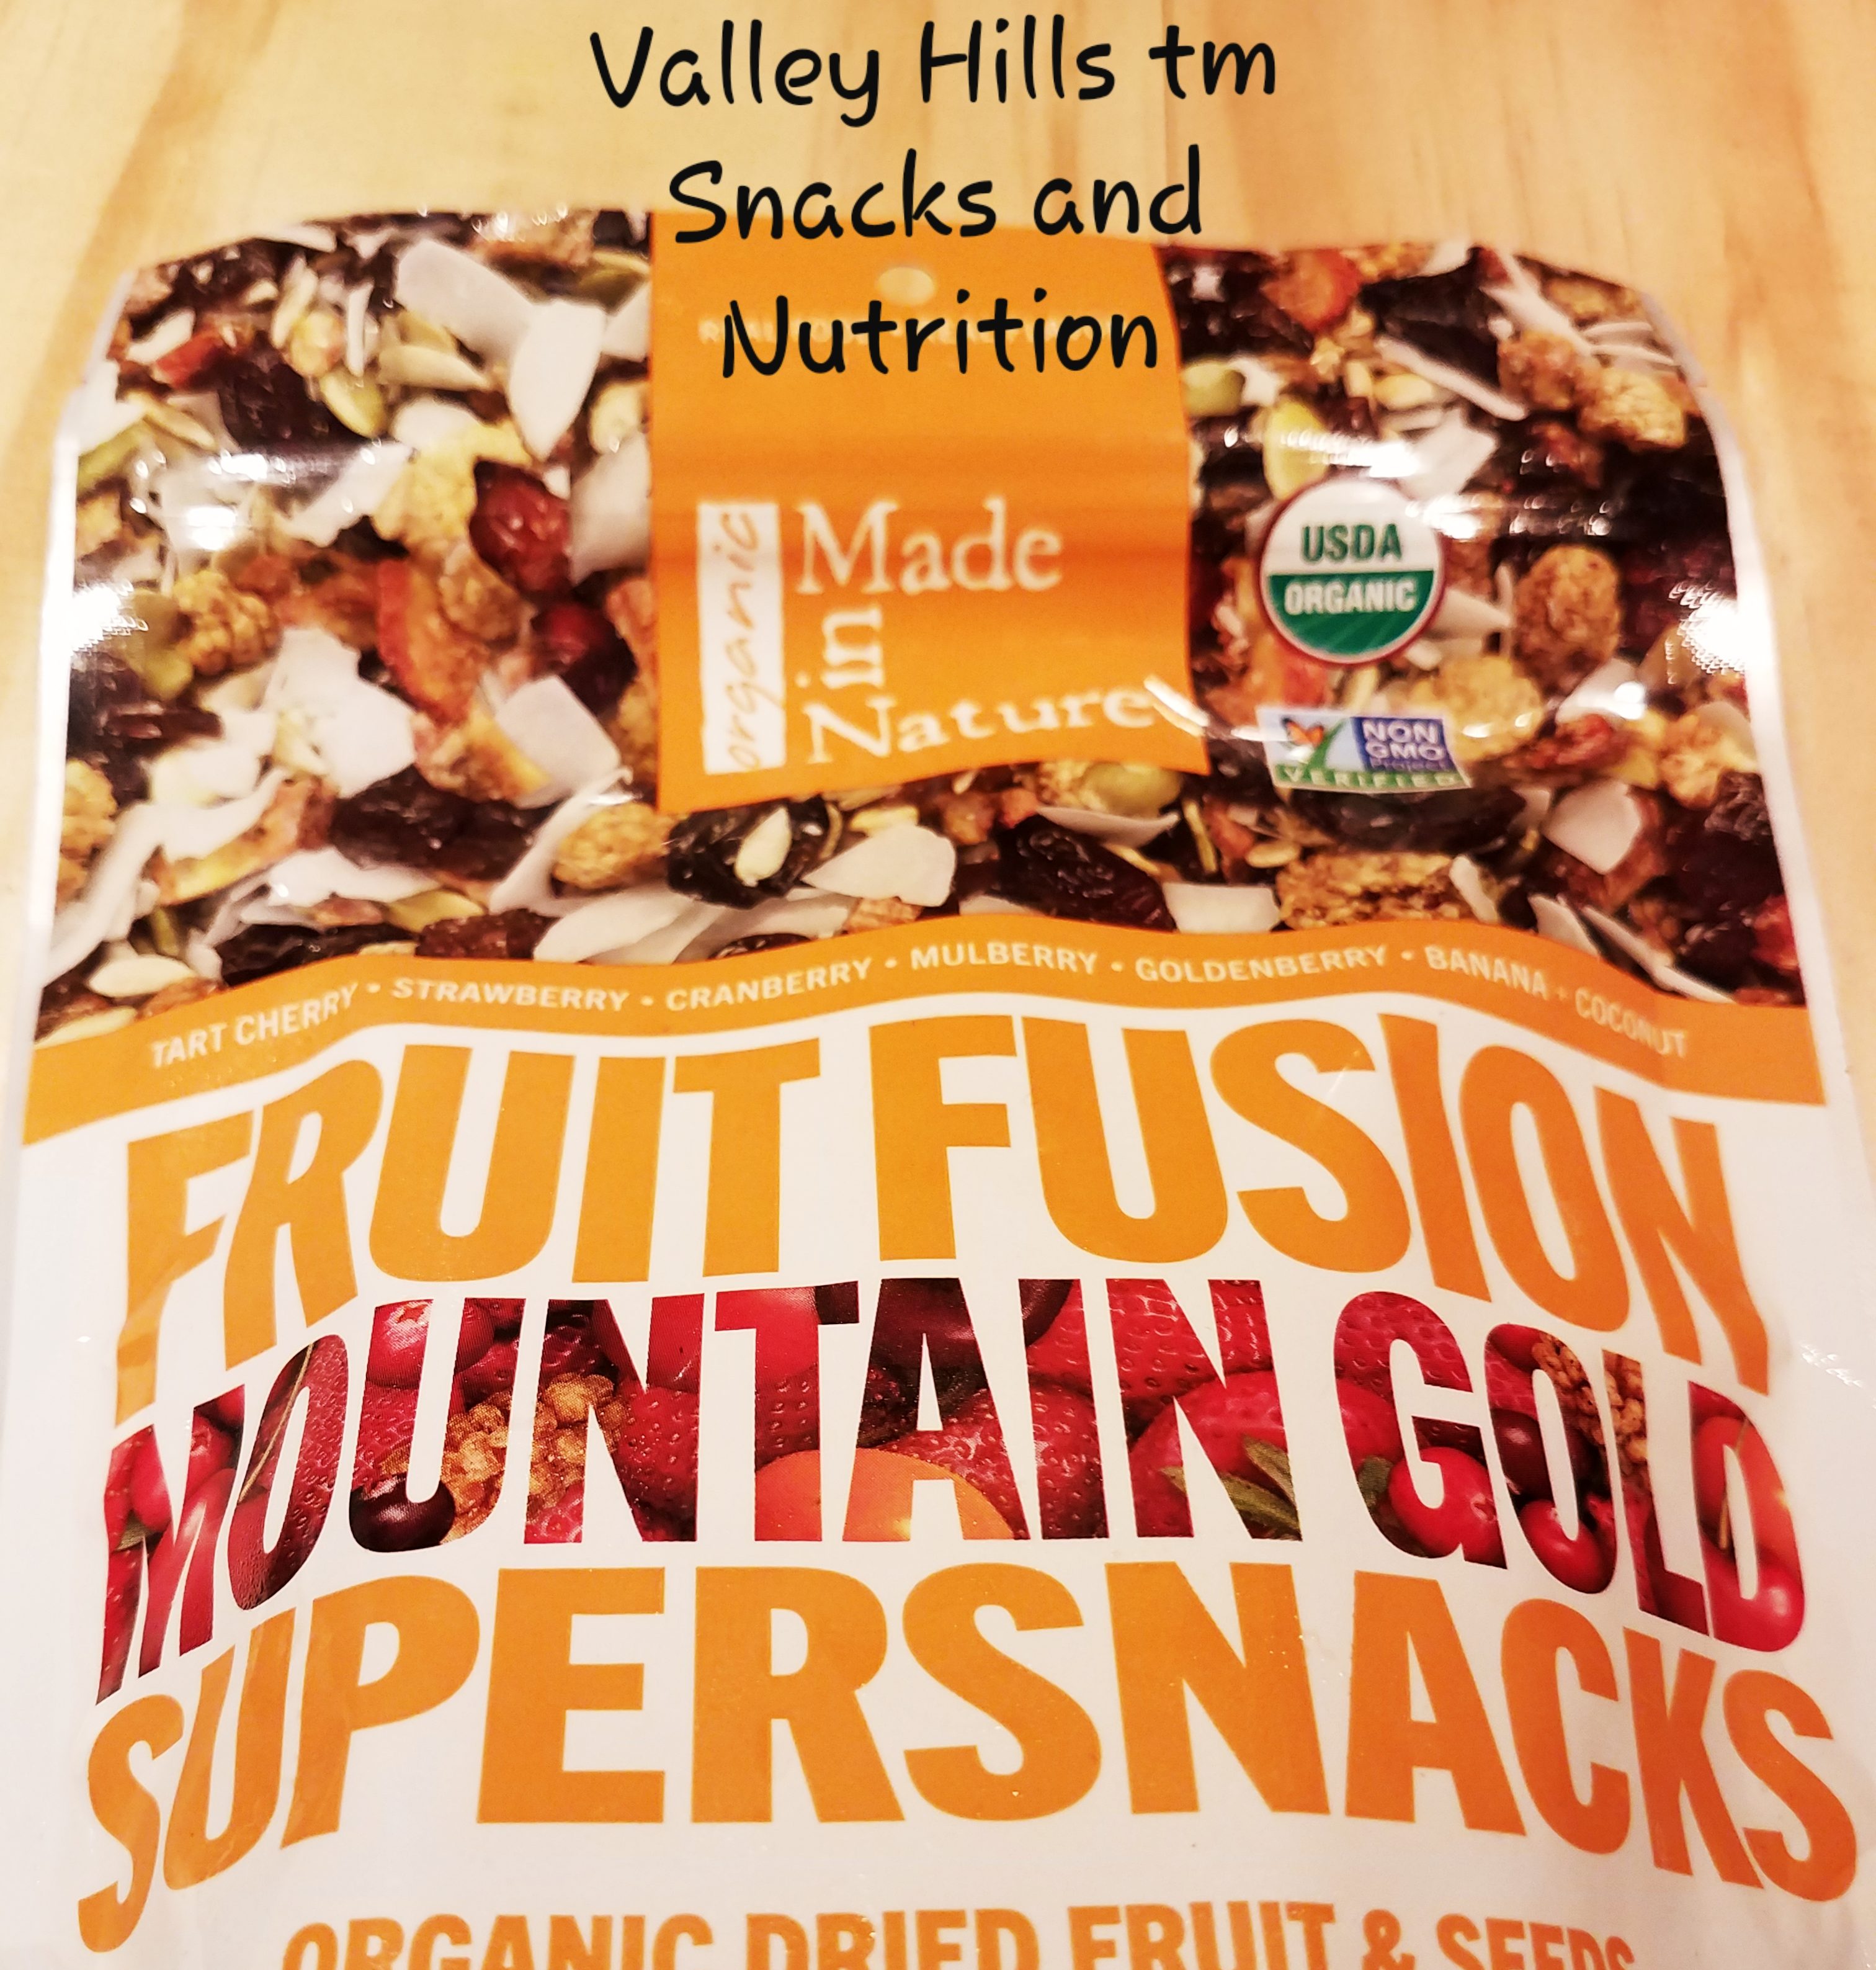 MOUNTAIN GOLD FRUIT FUSION SUPERSNACKS FROM VALLEY HILLS tm NUTRITION